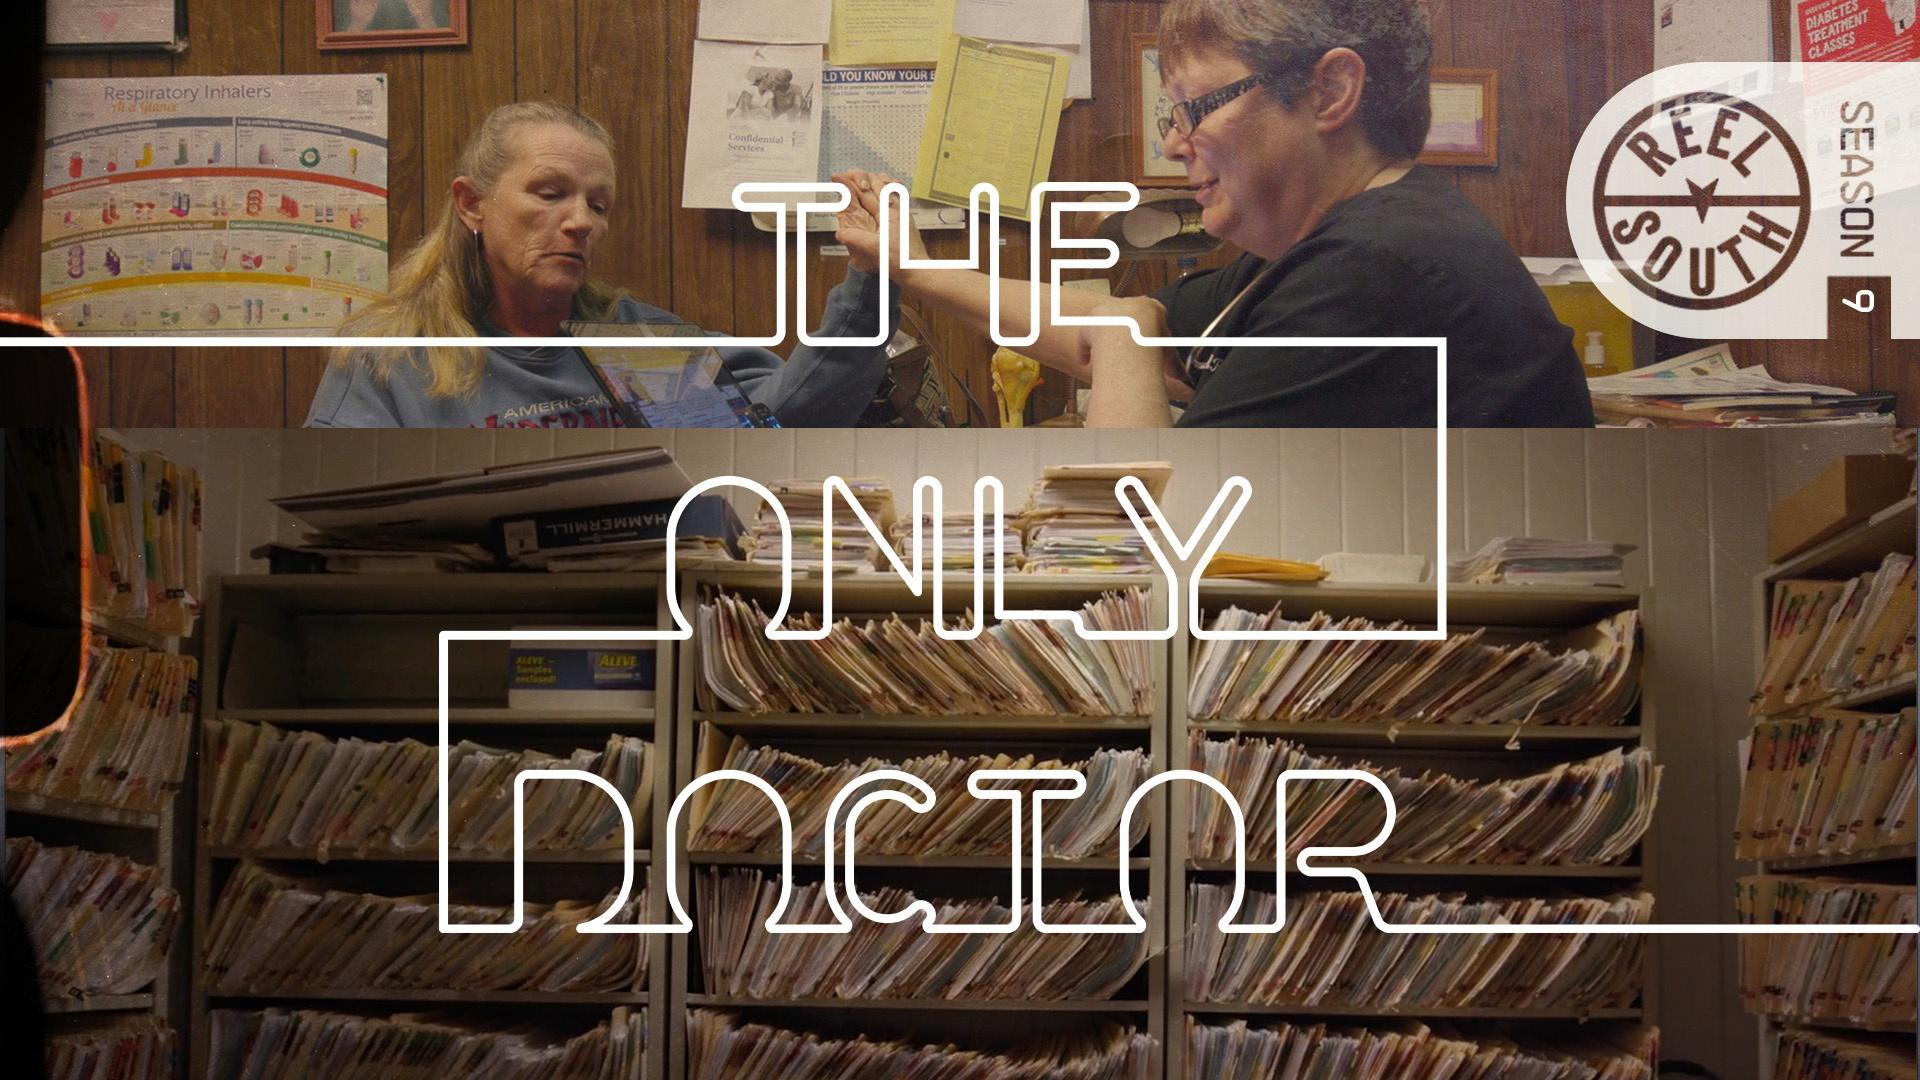 Key art for Reel South's season 9 episode, "The Only Doctor."